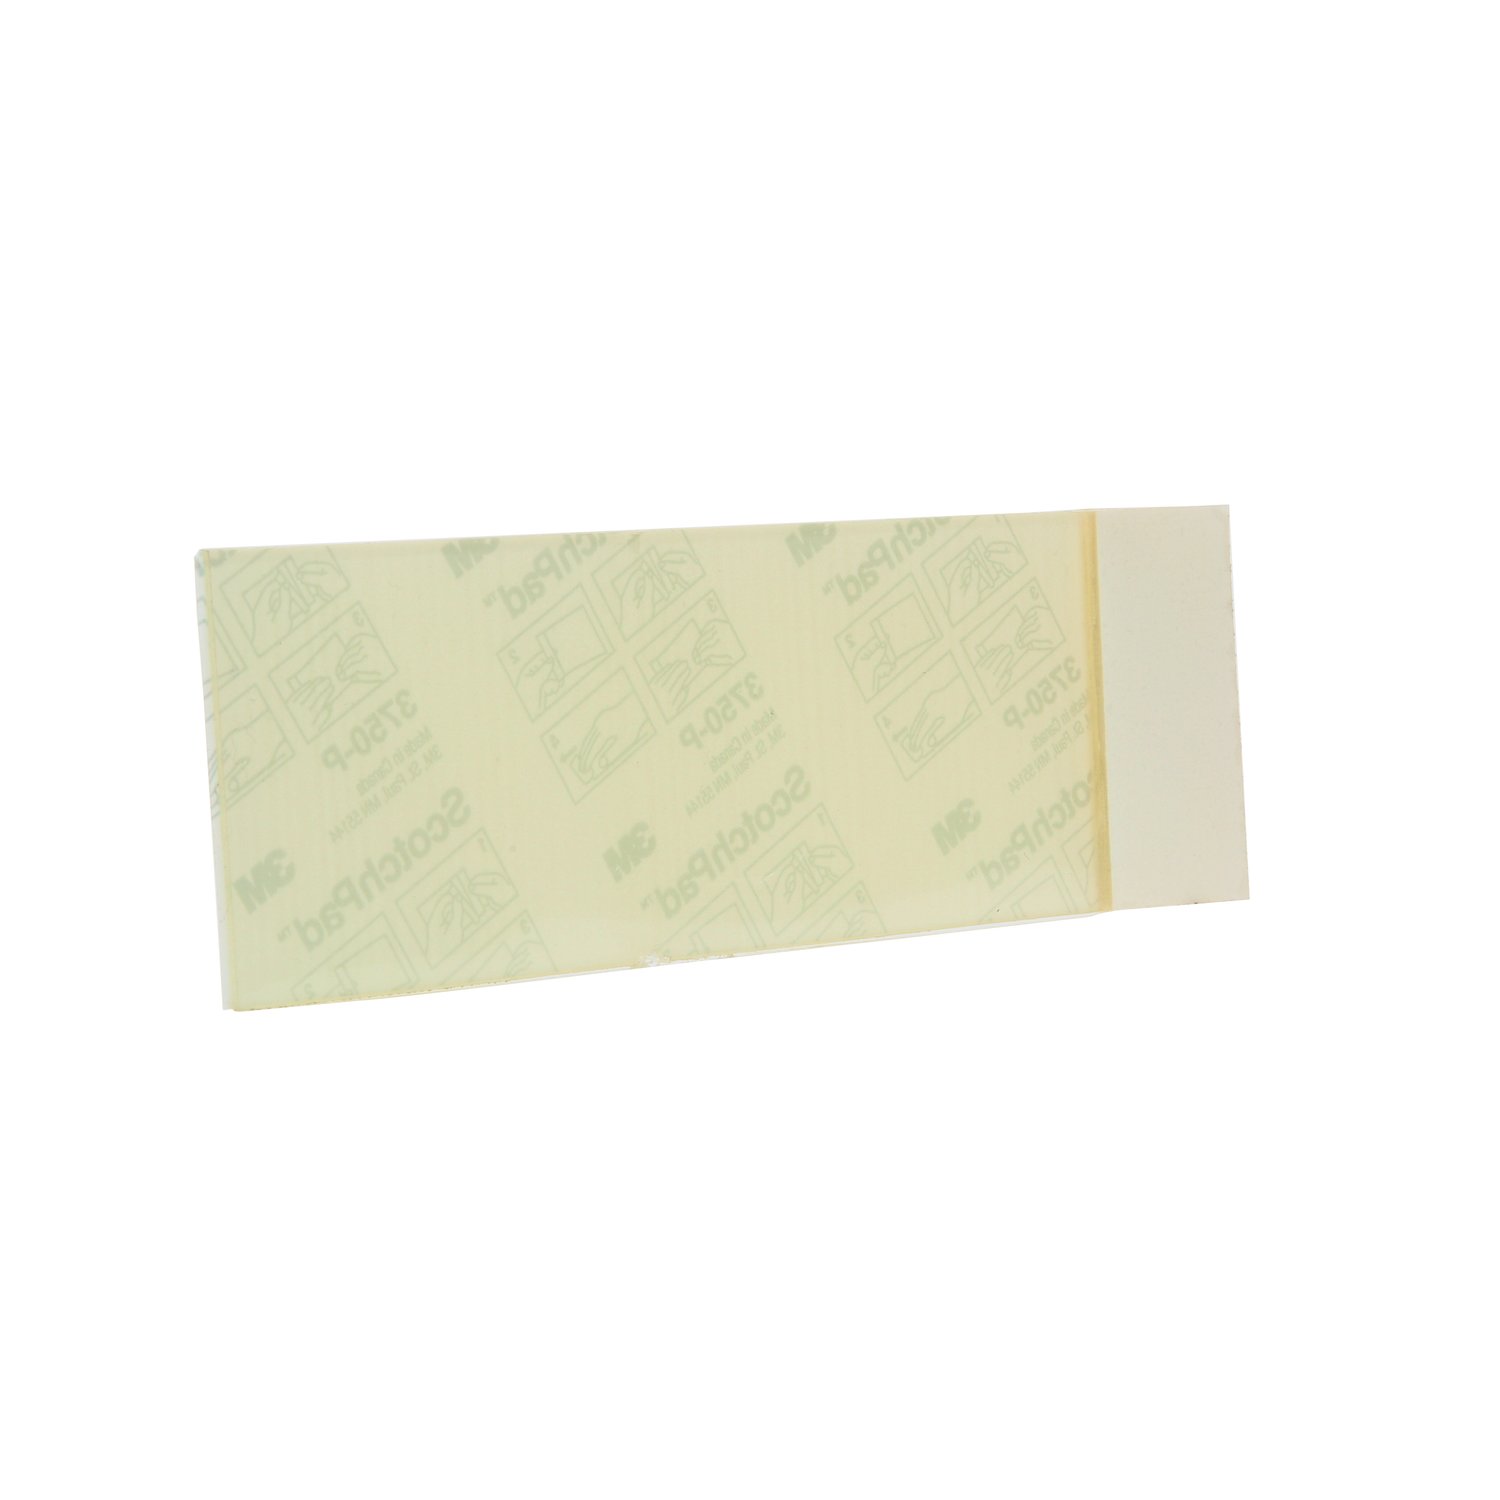 Post-it Super Sticky Recycled Notes 660-3SST, 4 in x 6 in (101 mm